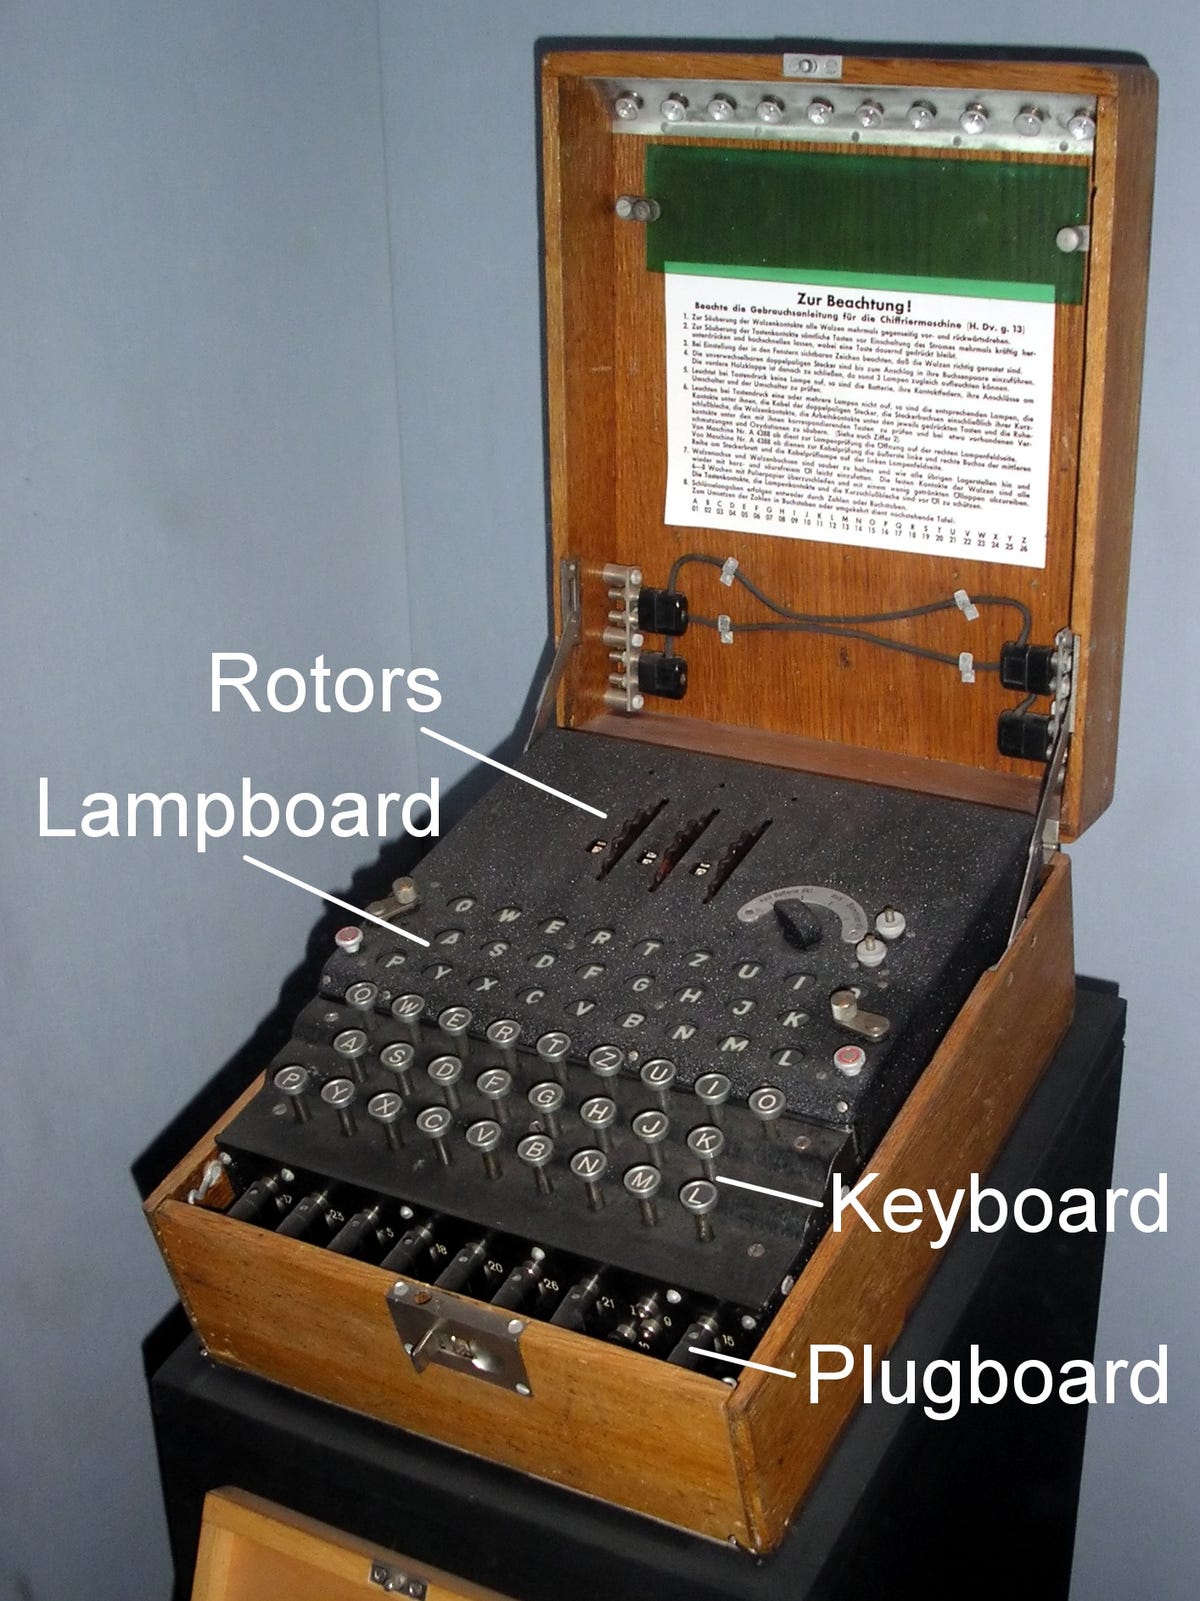 A keyboard, a lampboard, a plugboard and three rotors are the basic components of an original WWII Enigma Machine.